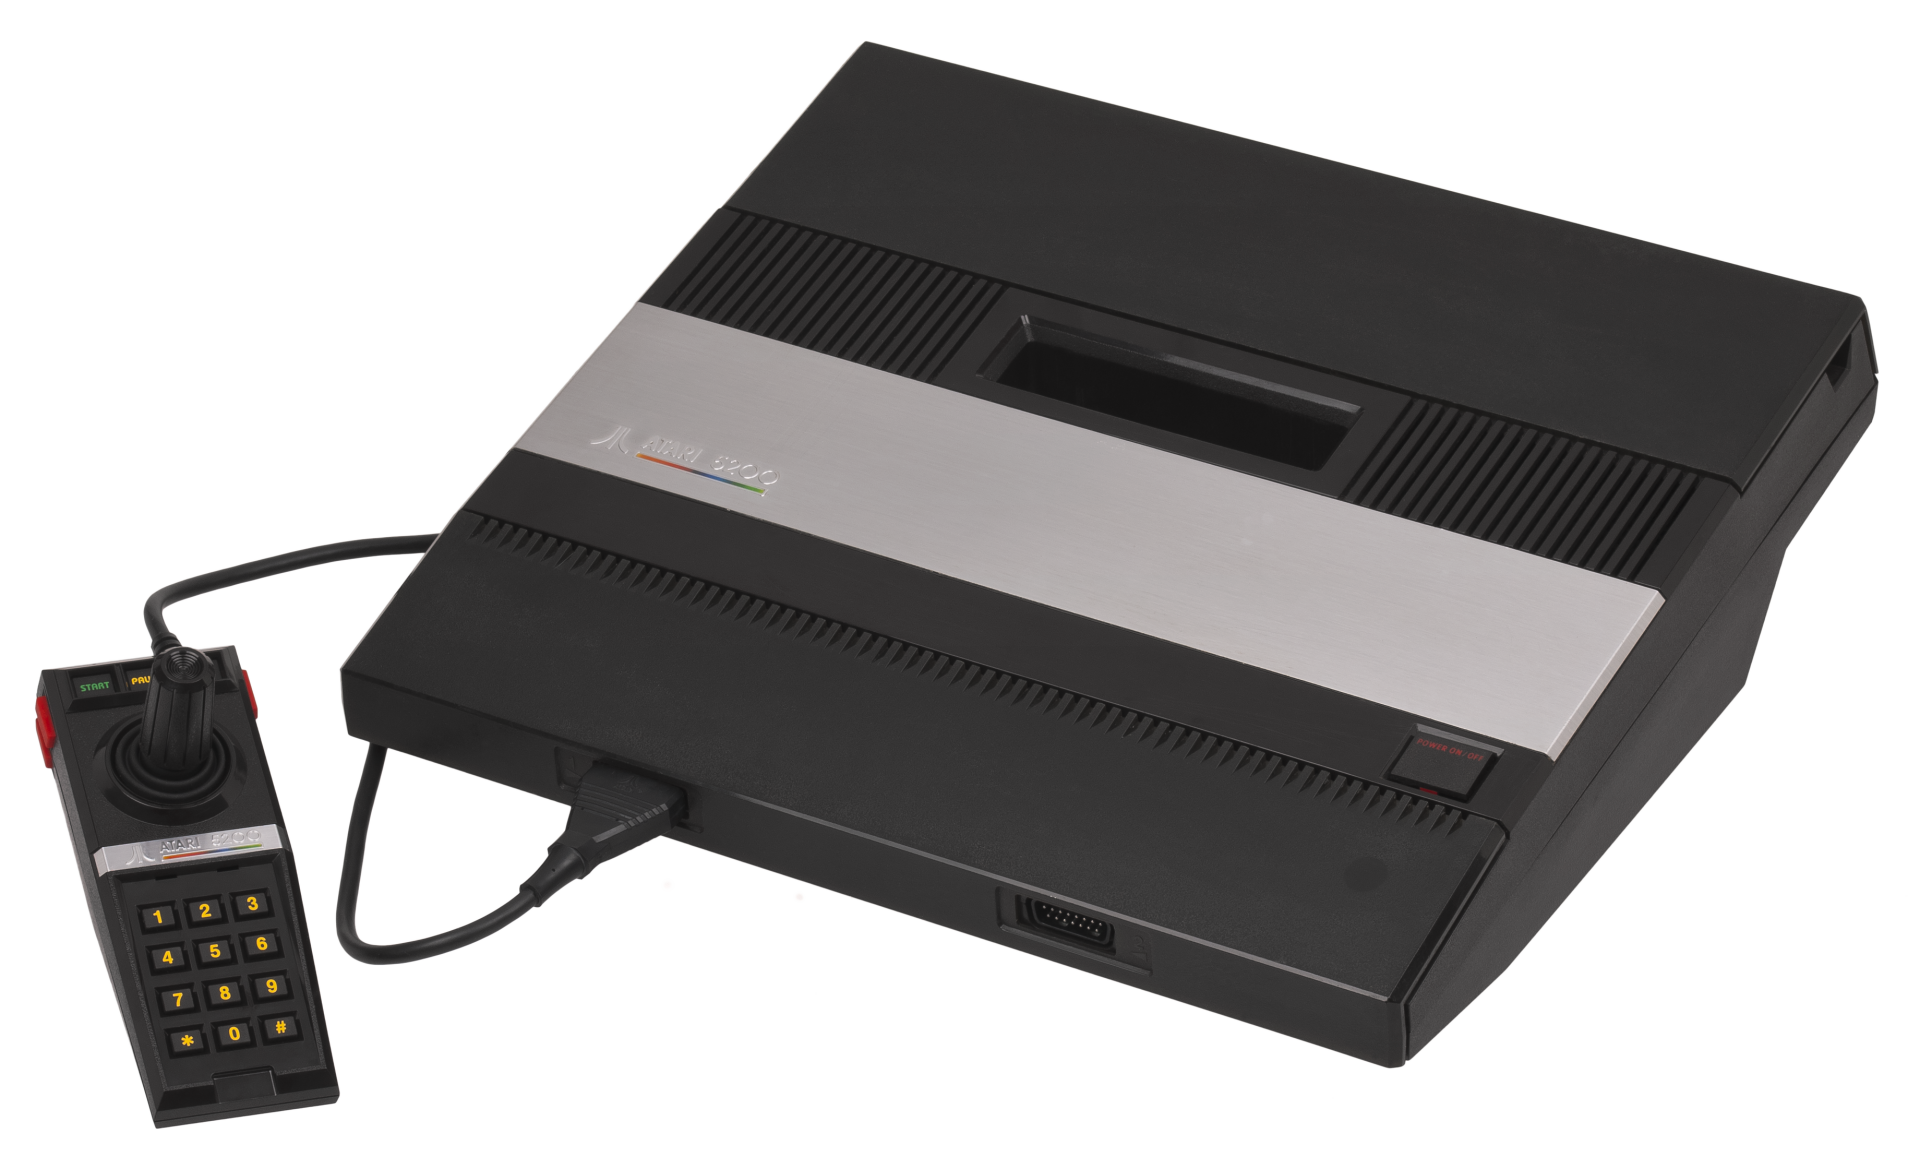 The Atari 5200 home console and controller